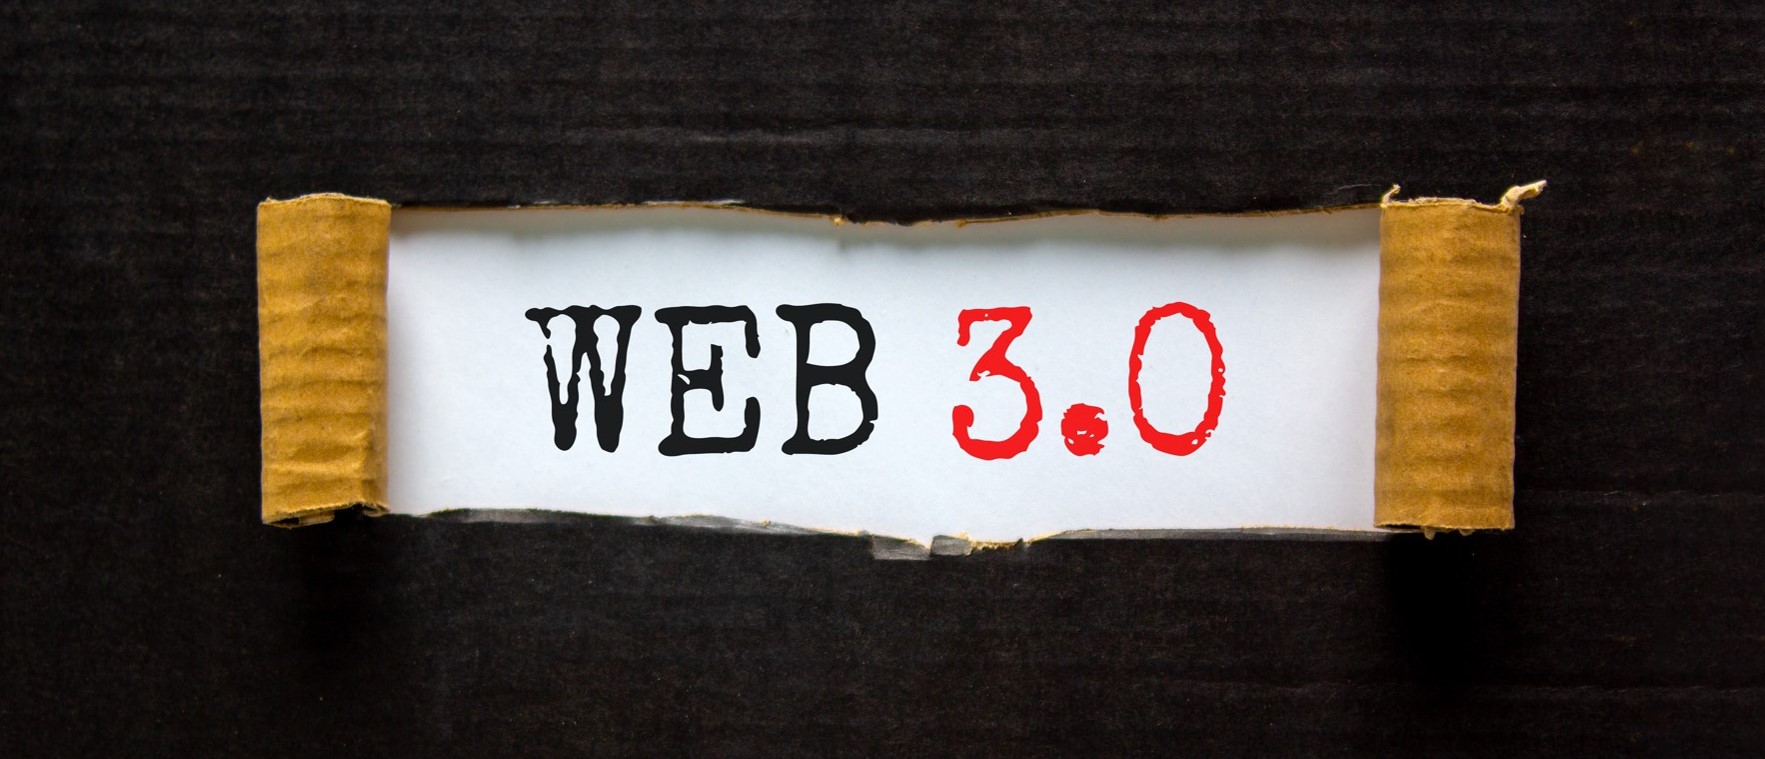 impacts of web 3.0